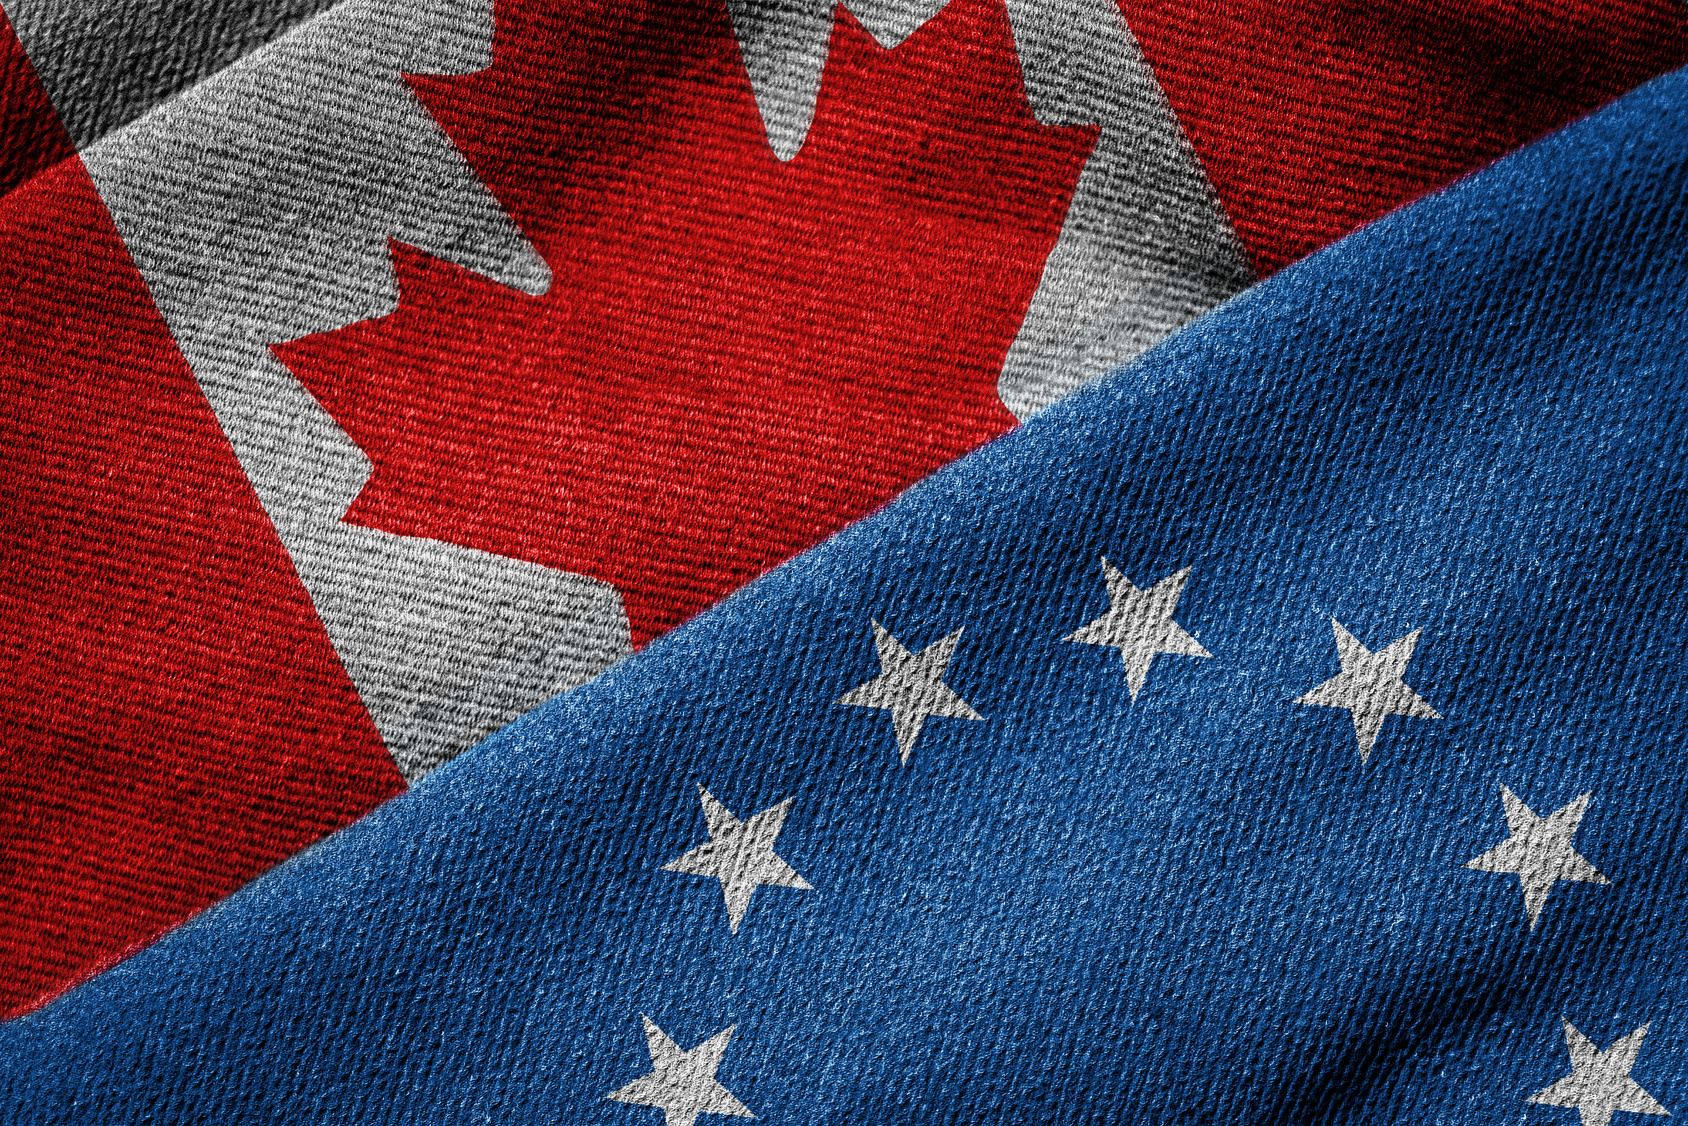 CETA Concept: Flags of EU and Canada on Grunge Texture